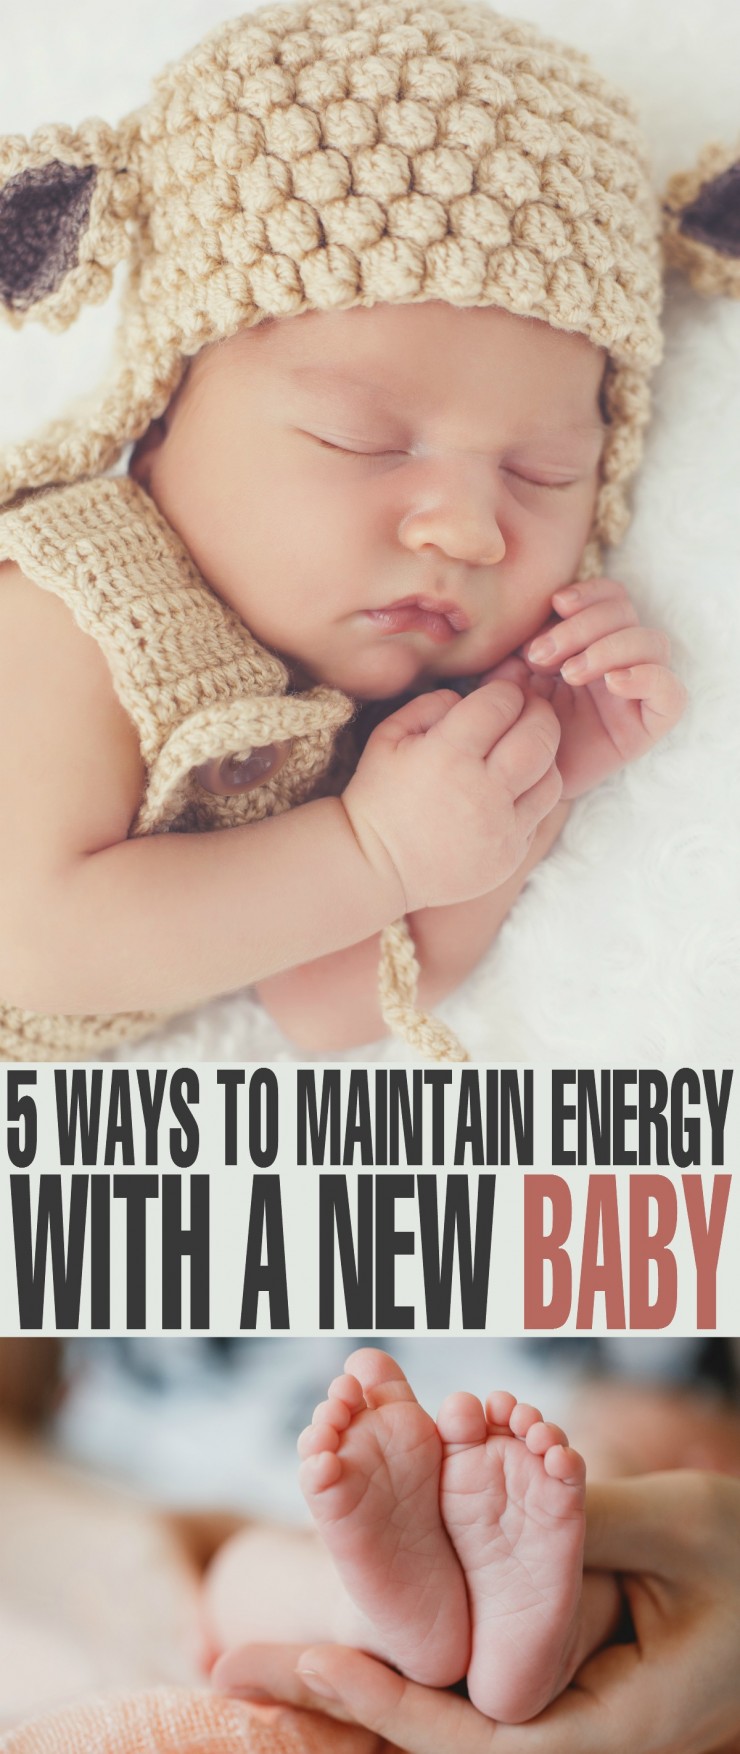 5 Ways to Maintain Energy with a New Baby - Parenting can be exhausting, but never more than with a newborn. These parenting tips will help you get through those early days!